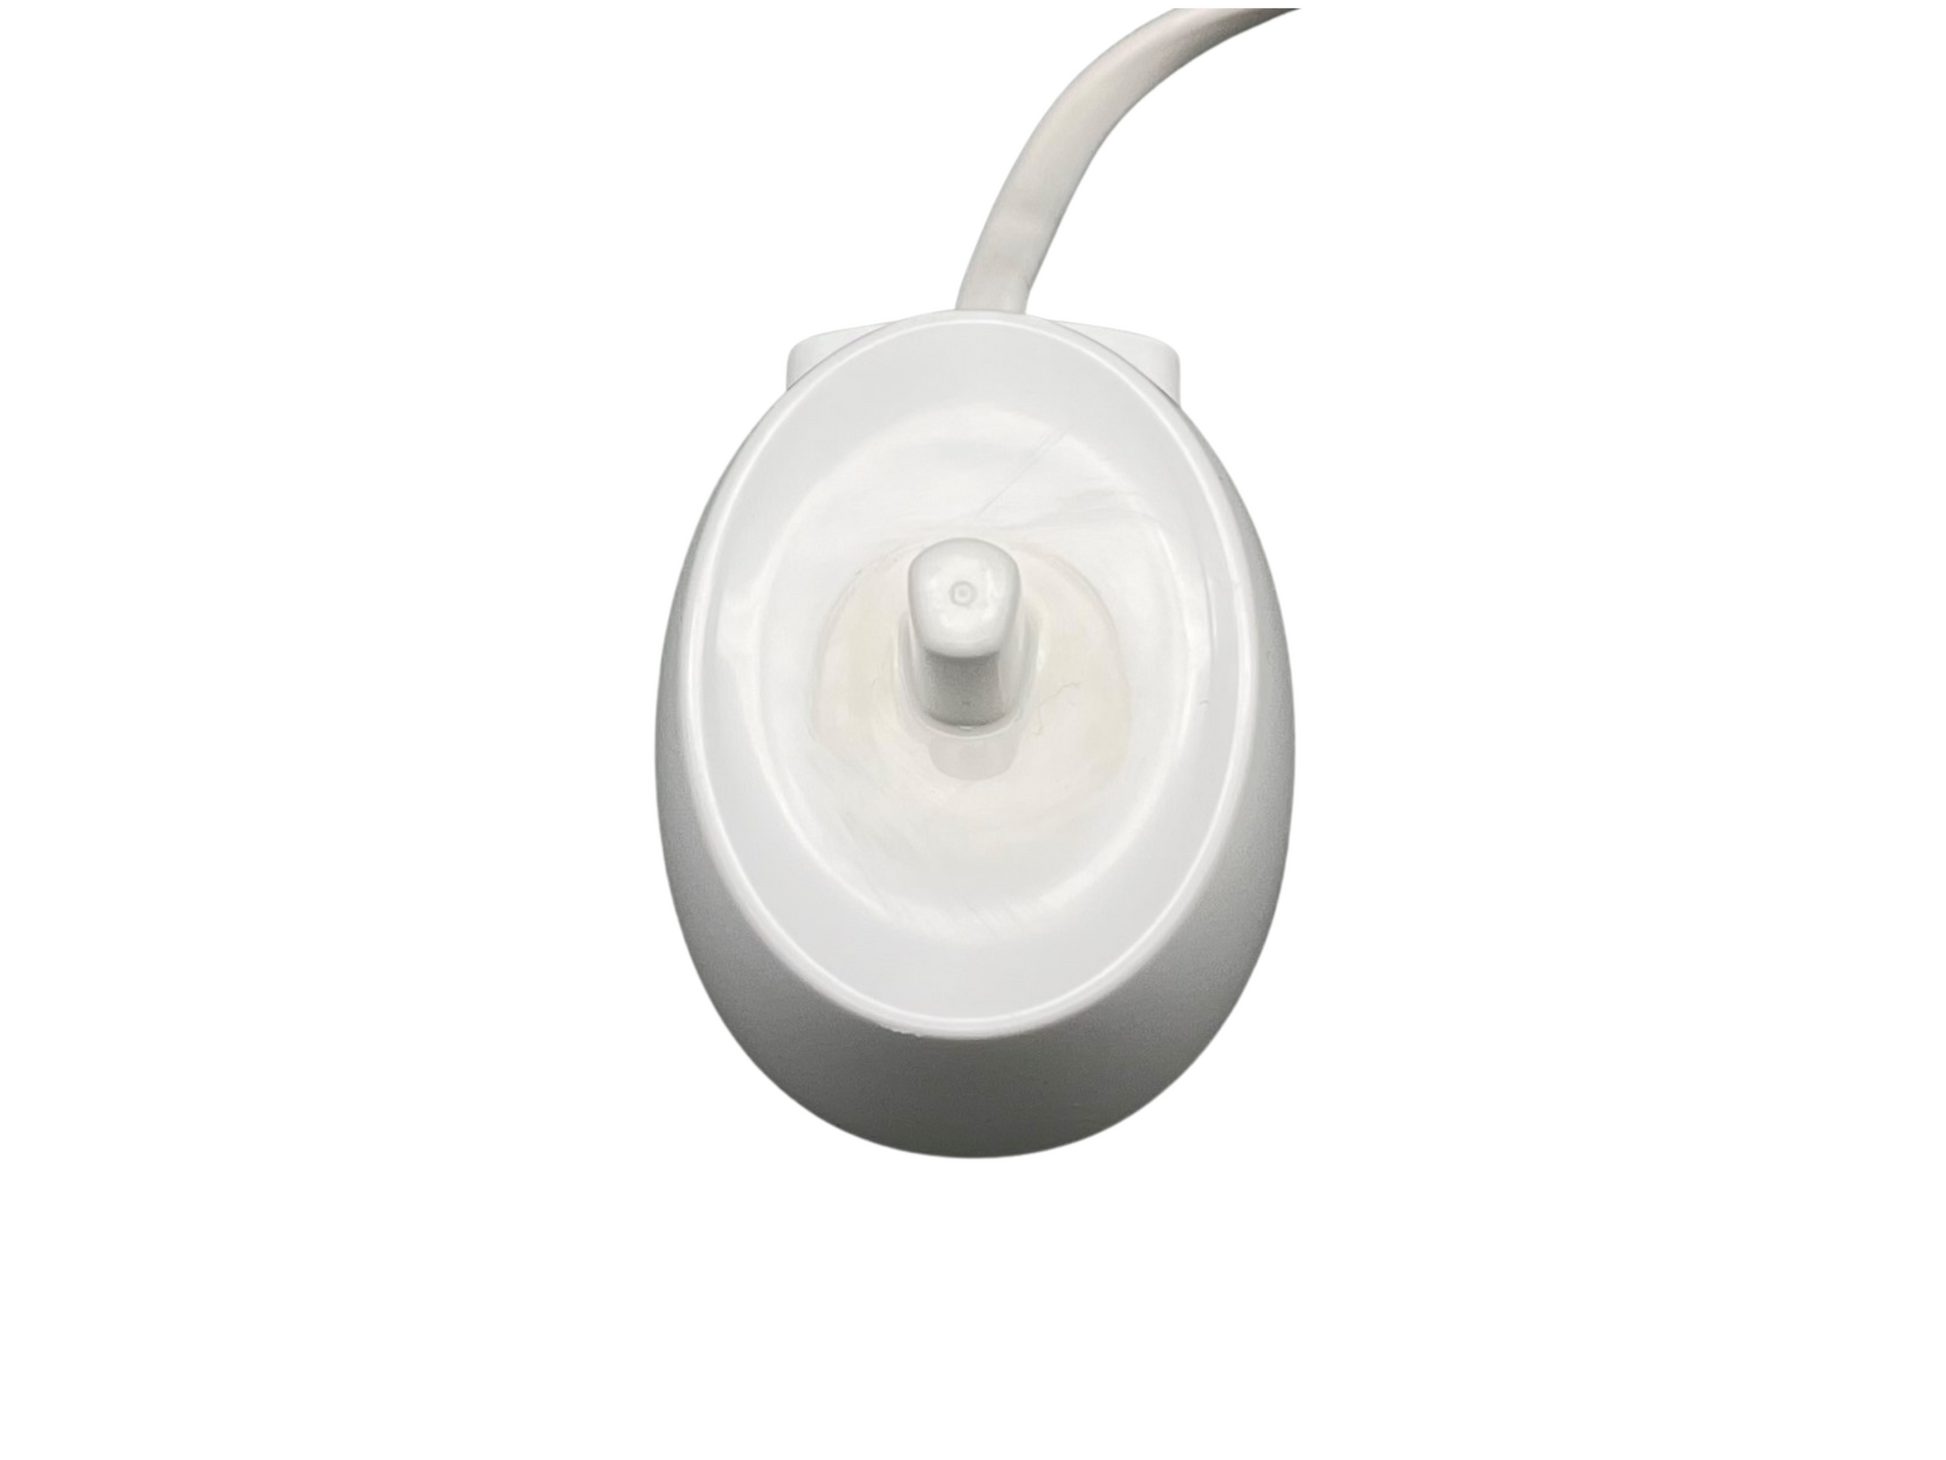 Oral-B Electric Toothbrush Charger